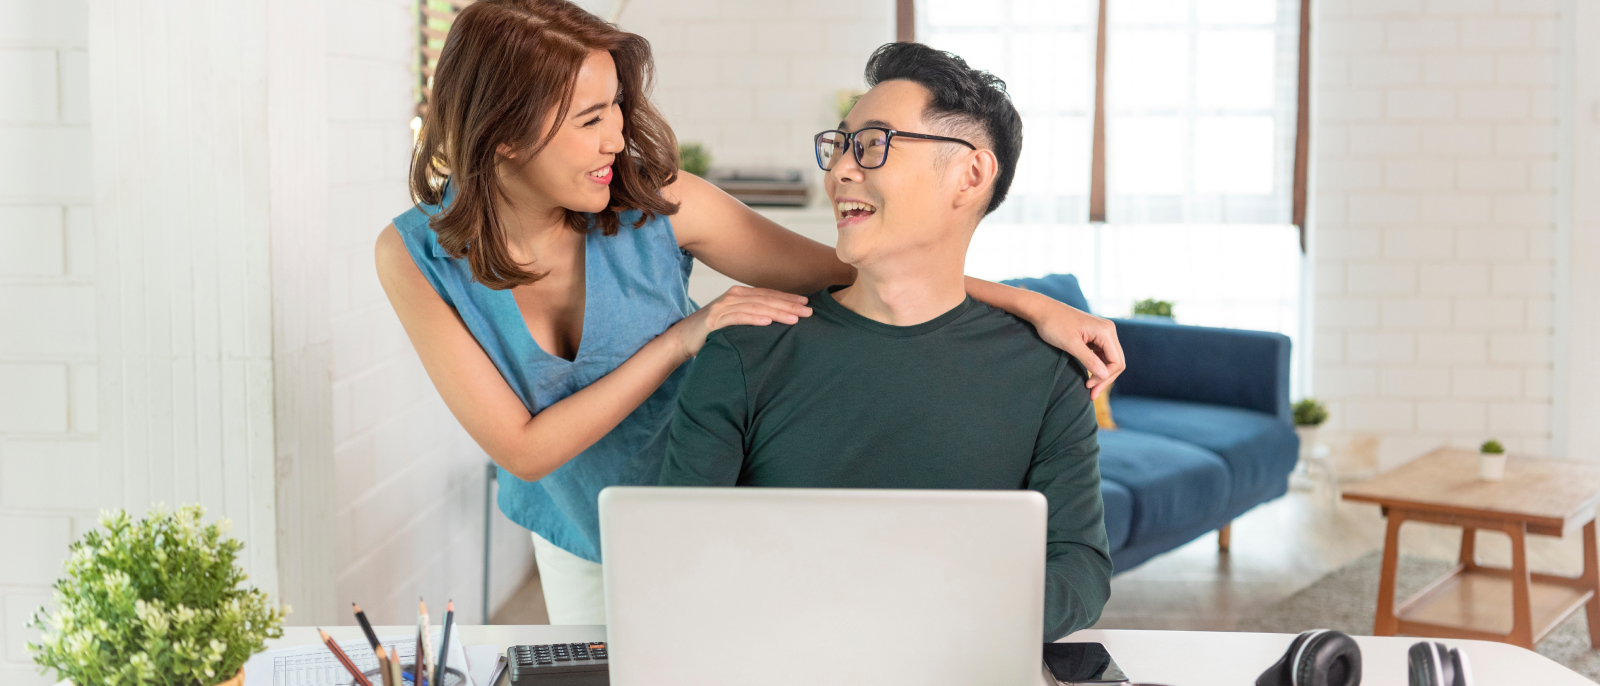 A young couple on a laptop smiling at each other (because they've just learned what is included in a mortgage payment).